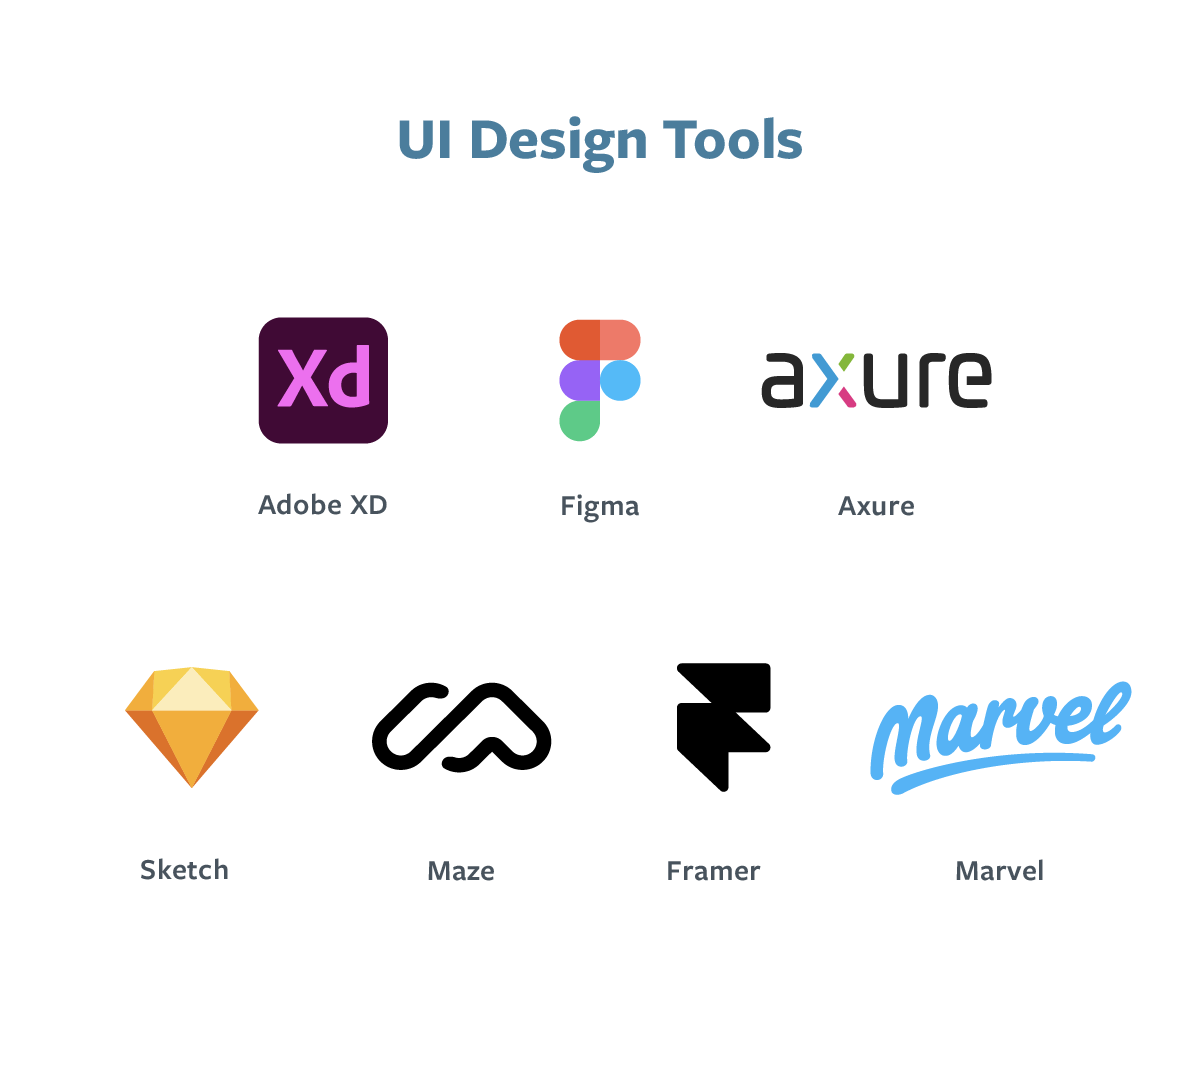 An image listing all the helpful UI design tools people should consider to practice and enhance their skill set.